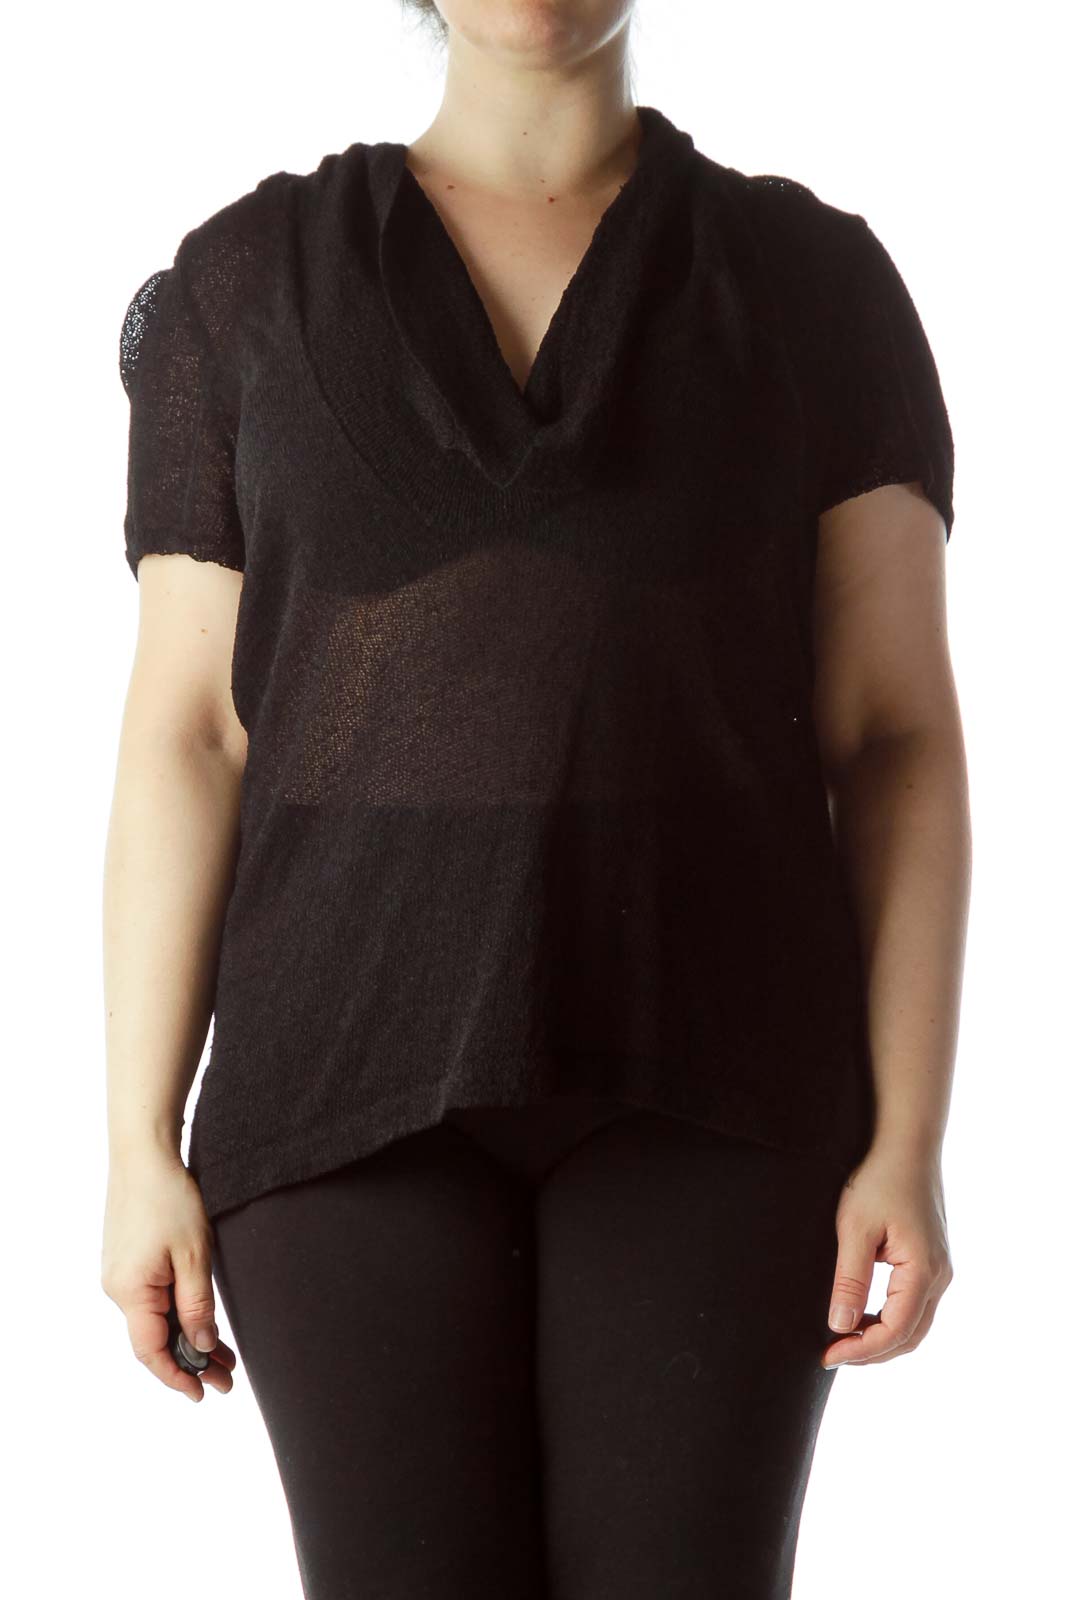 Black Knit See Through Cowl Neck Flared Top Front